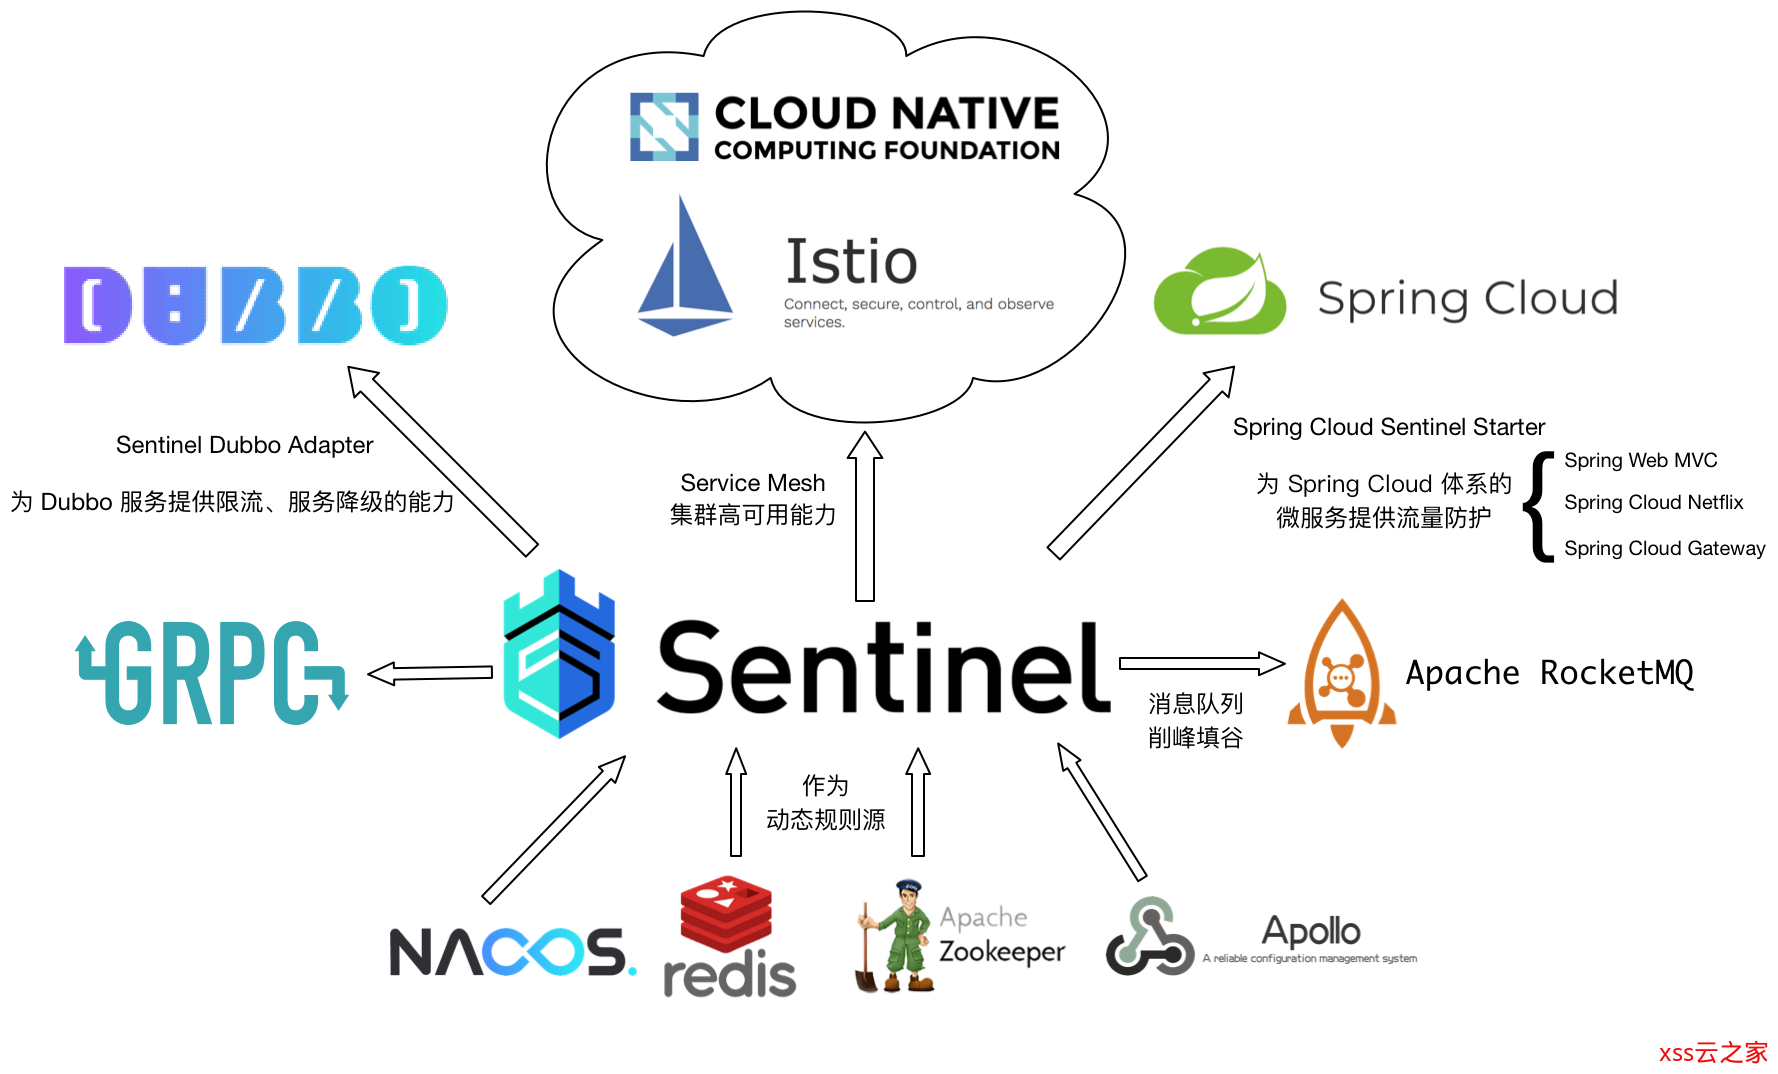 Istio. GRPC vs rest API. Spring cloud services. Service Mesh Gateway. Spring messaging